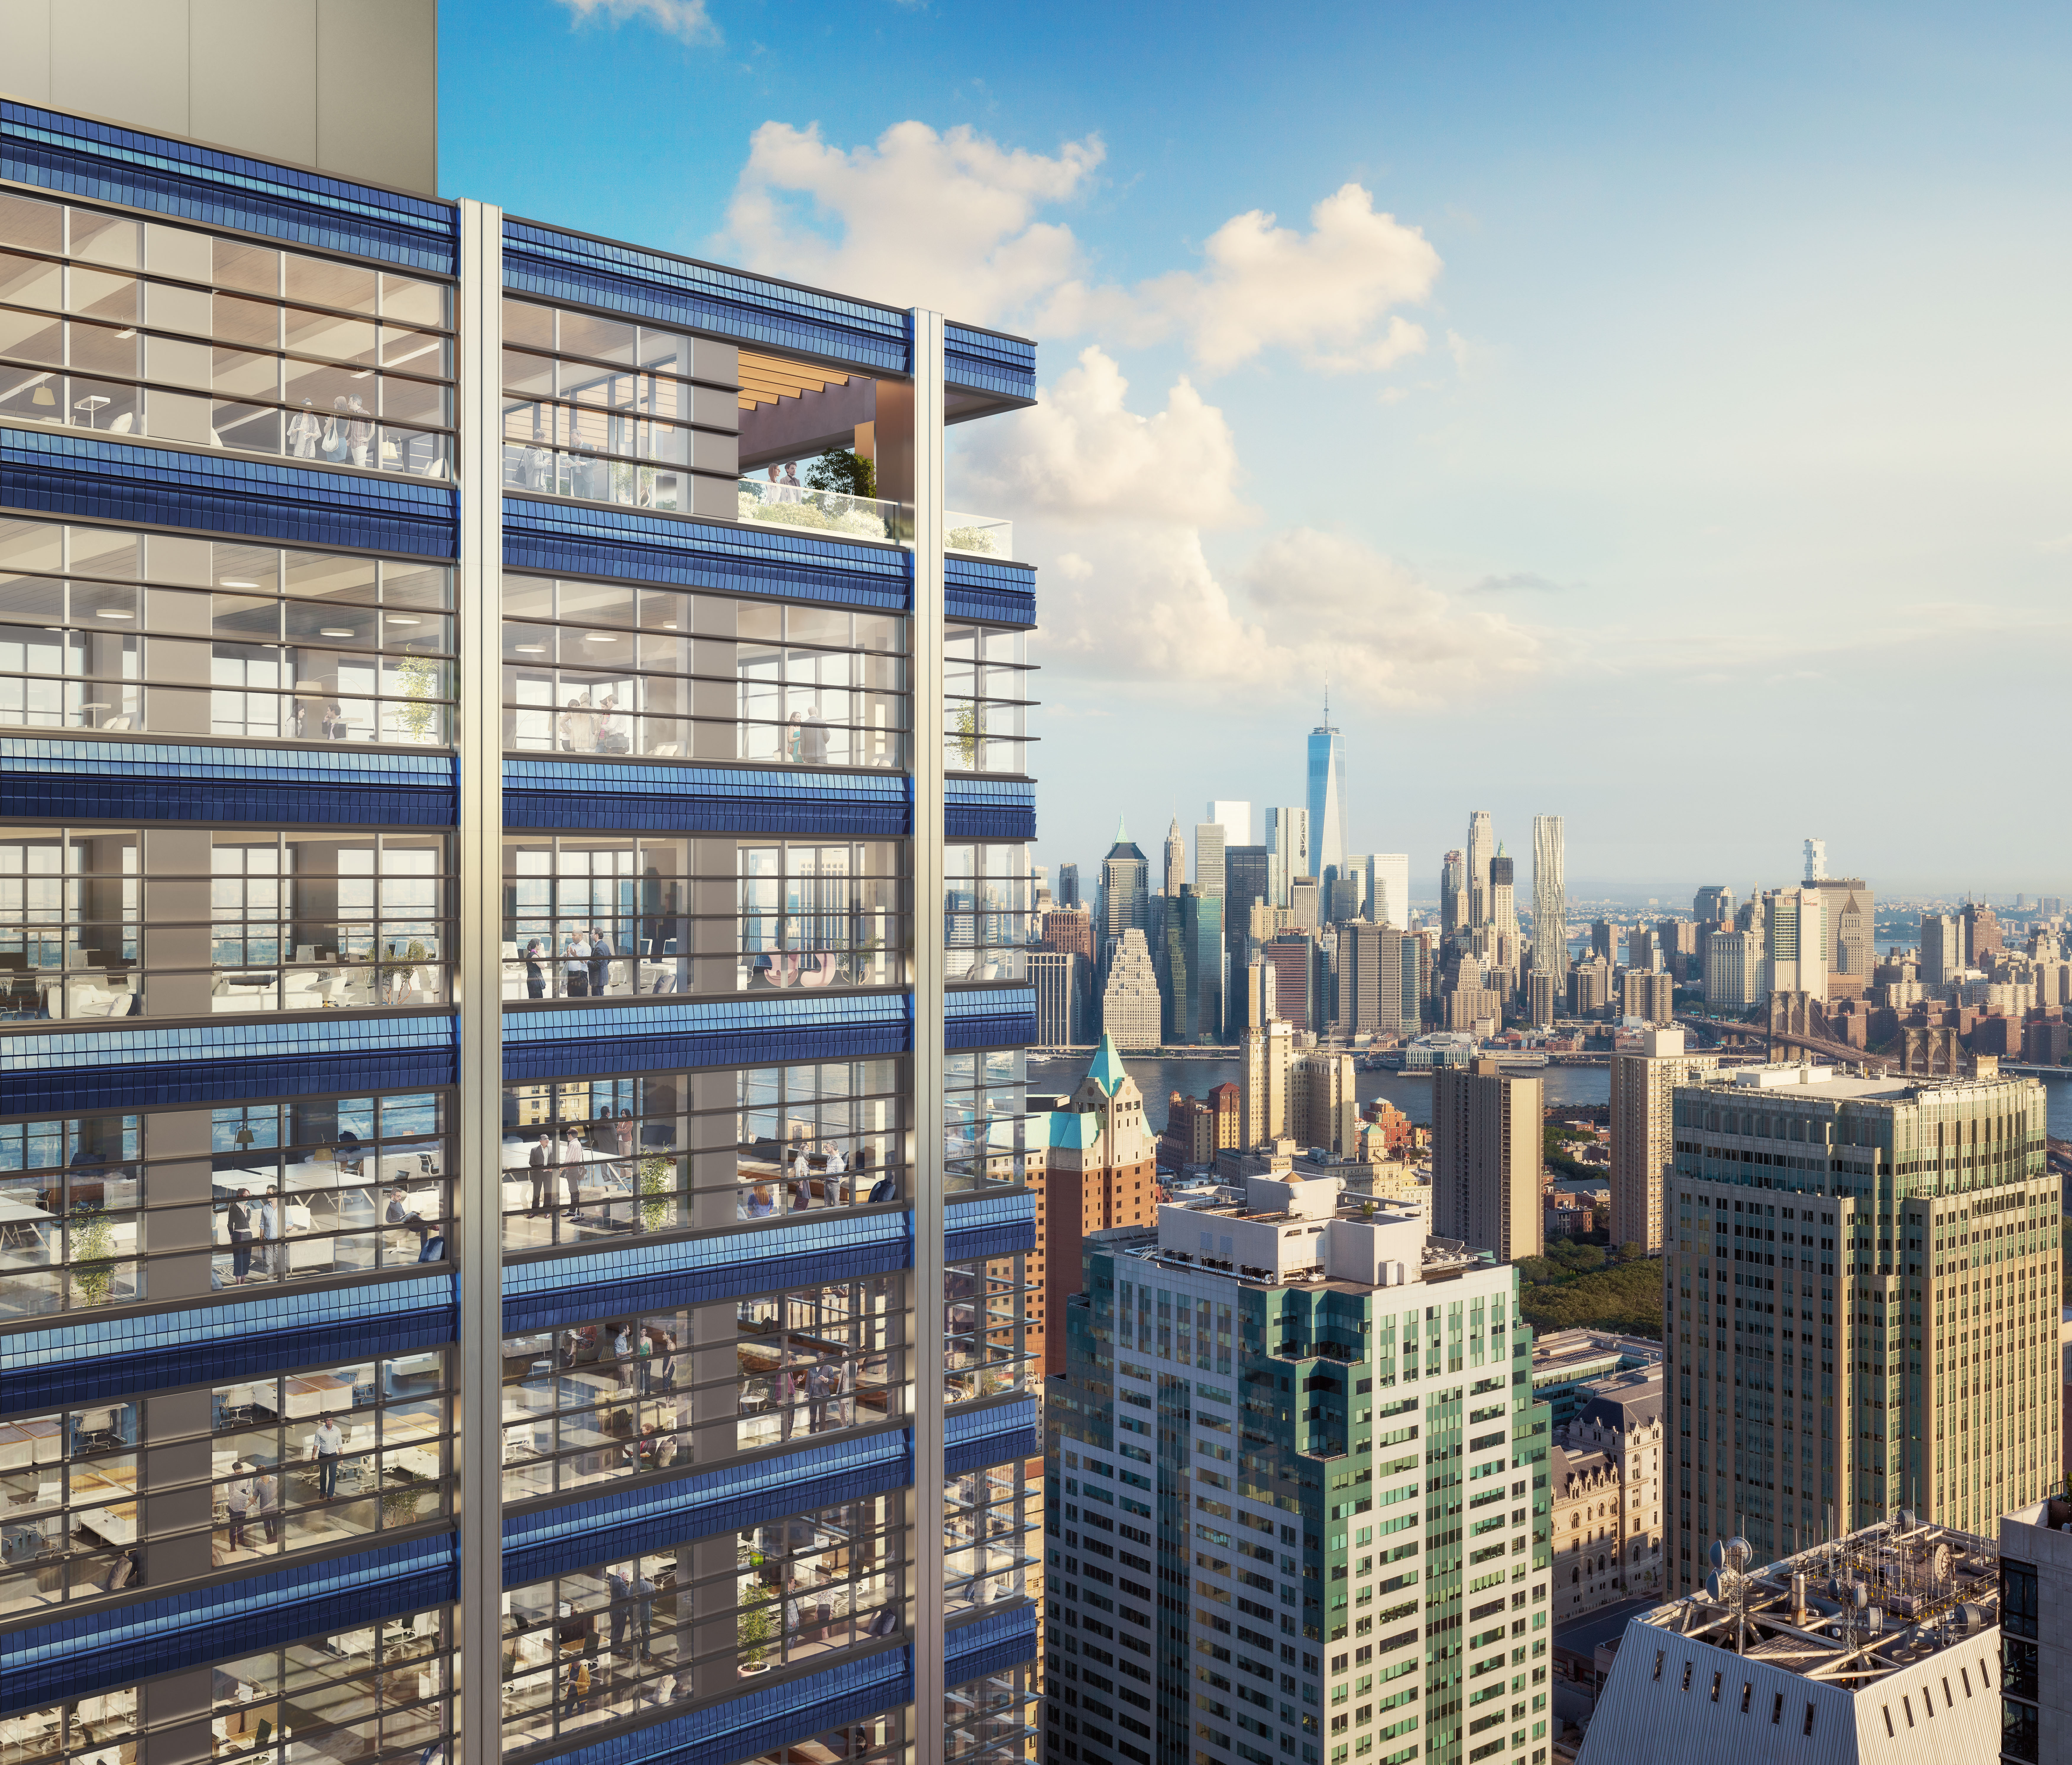 FXFowle Is Leaving Manhattan For The Brooklyn Office Tower It’s Designing